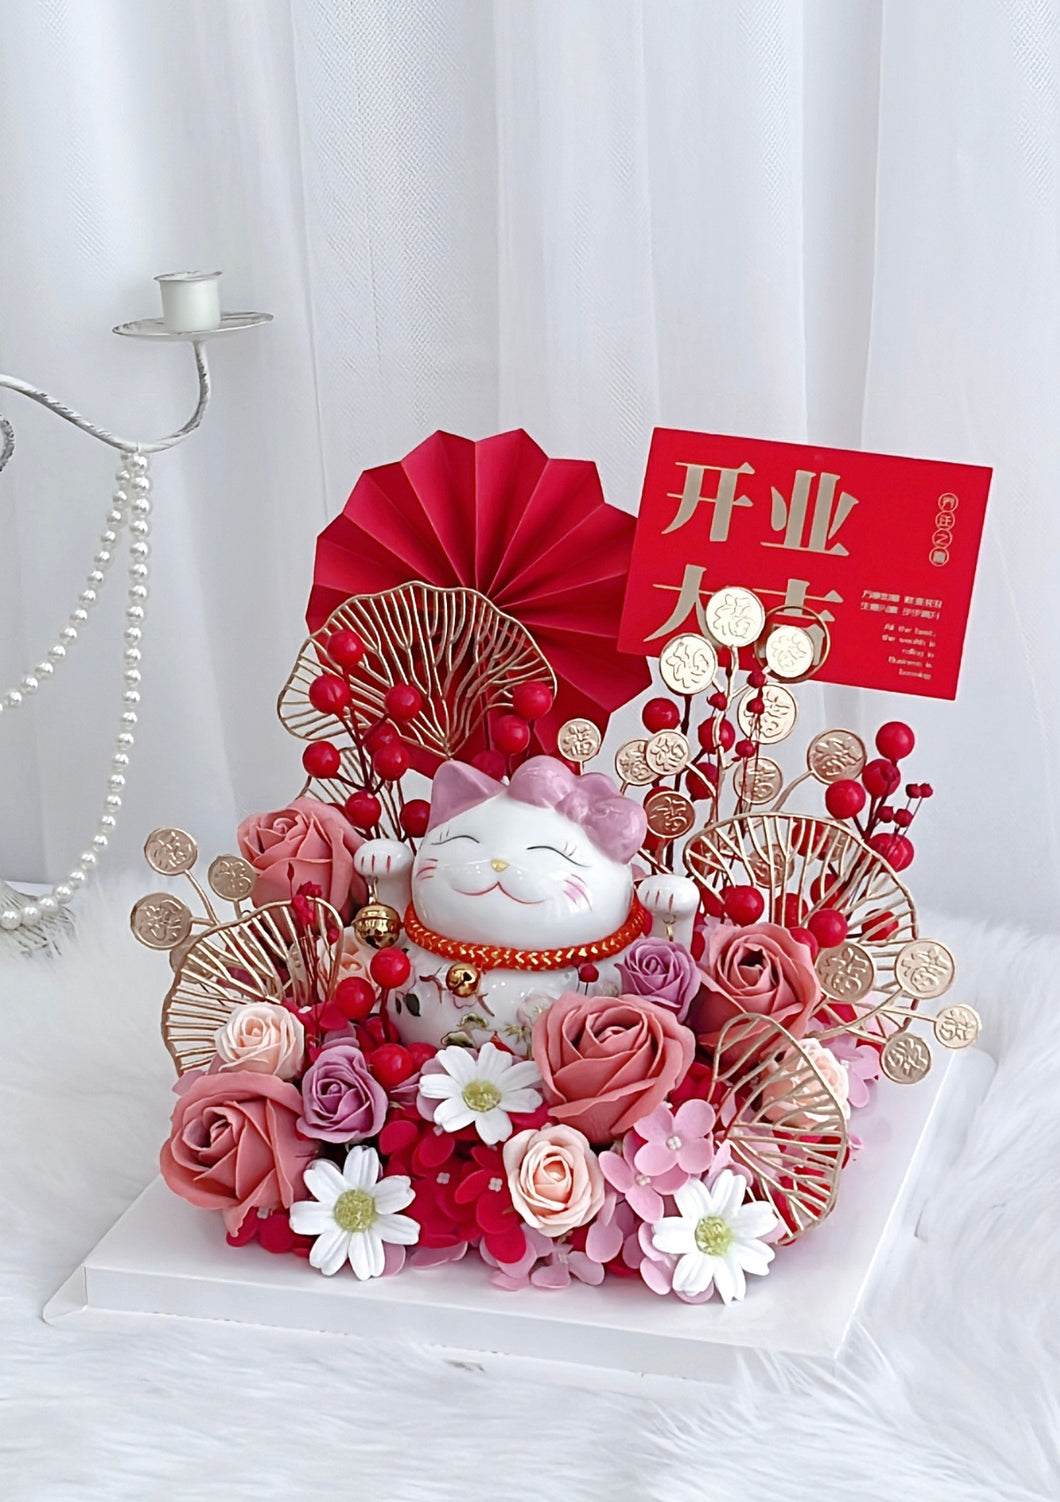 New Career and a Grand Exhibition Fortune Cat with Red Soap Flower Box 招财进宝招财猫香皂花开业礼盒